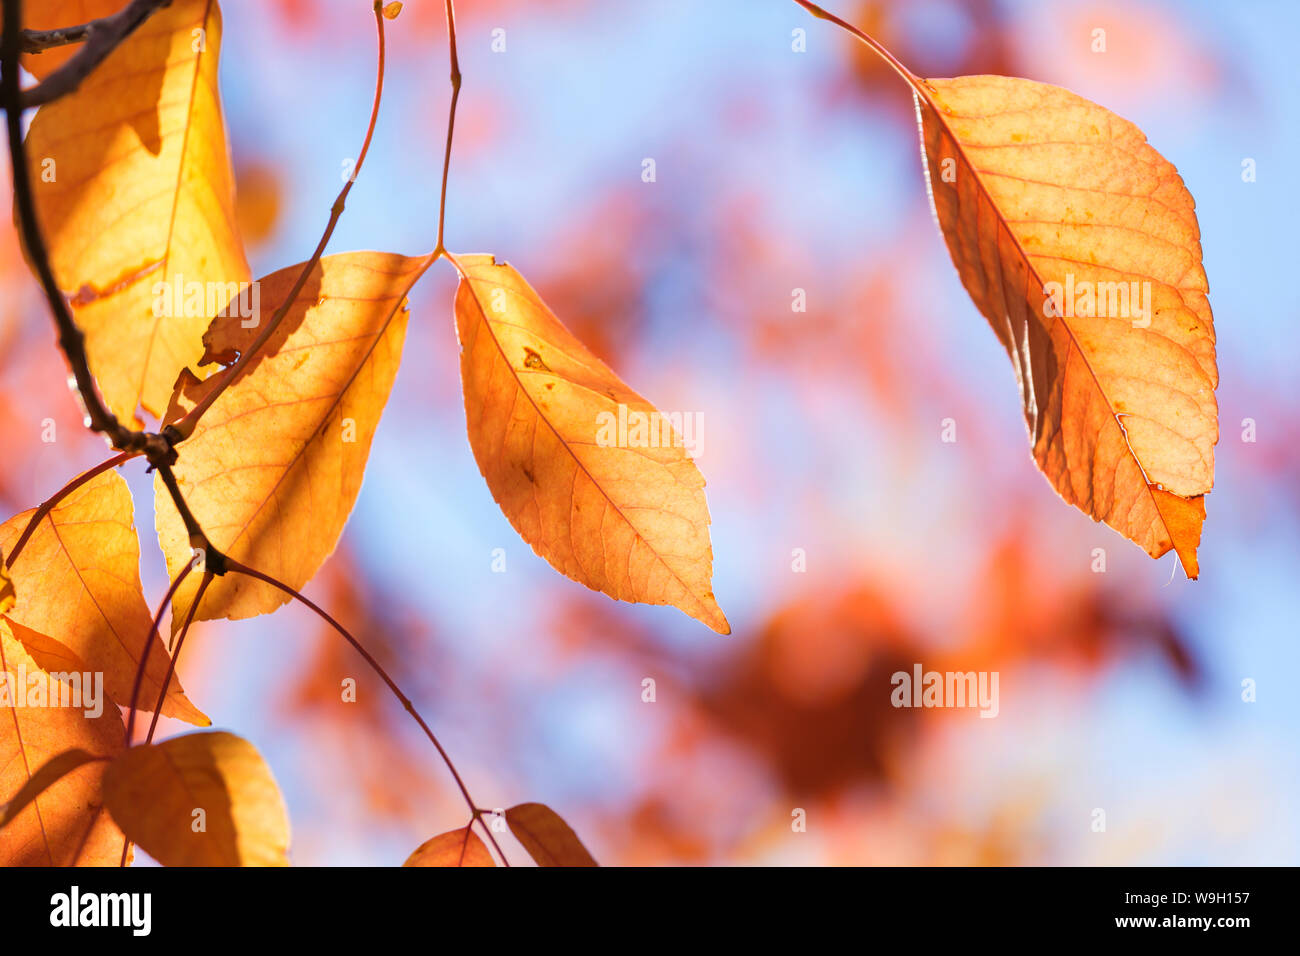 Colorful yellow leaves in Autumn season. Close-up shot. Suitable for background image. Stock Photo